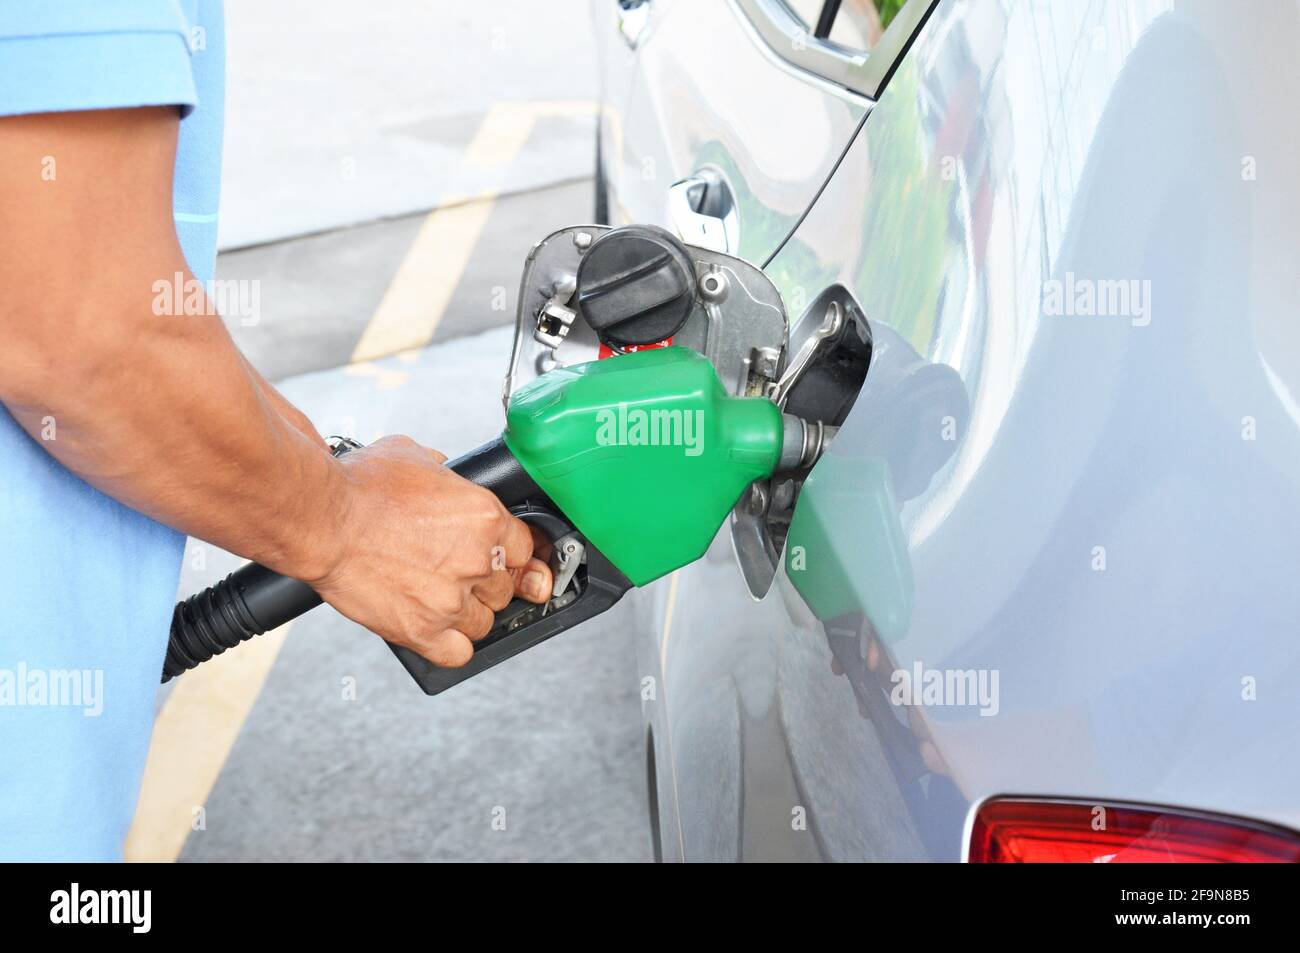 A man filling up the gas tank of a car Stock Photo